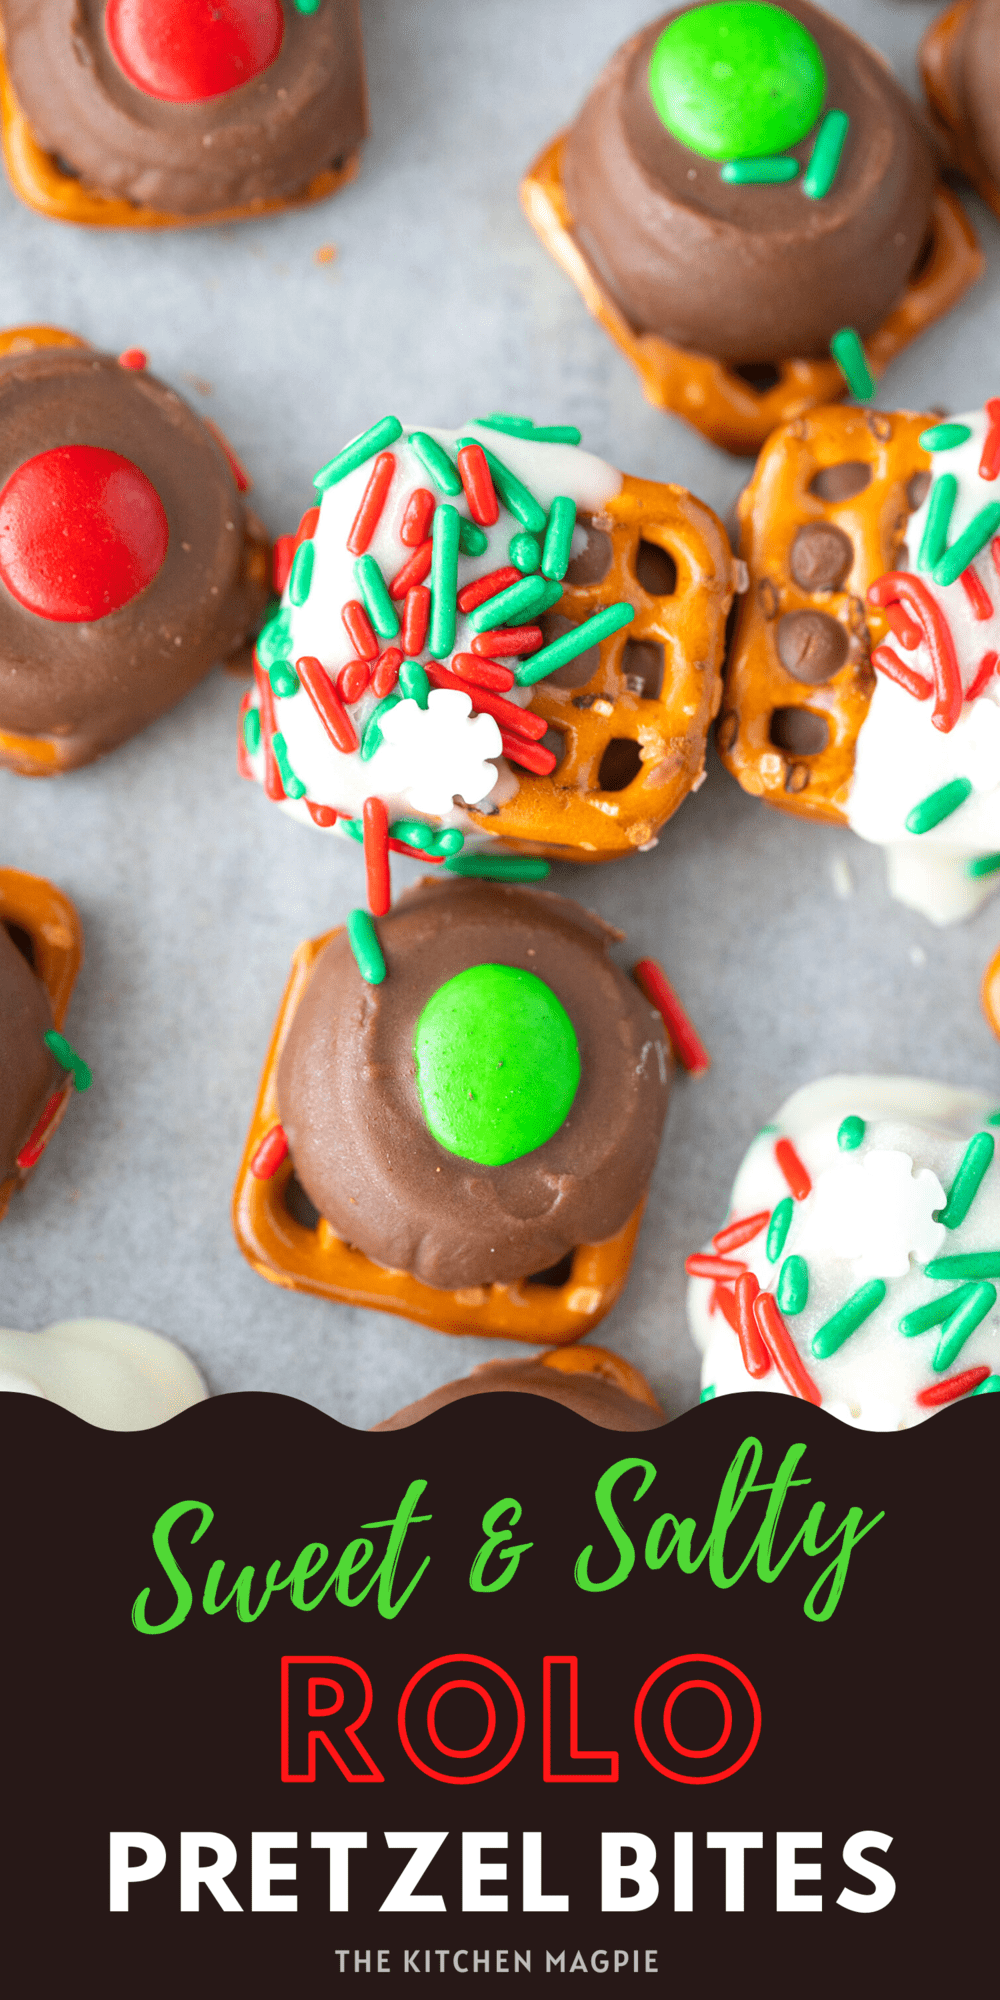 These Rolo Pretzel Bites are sweet, salty and so easy to make for any holiday! Simply change the color of the sprinkles or candies to match the occasion! 